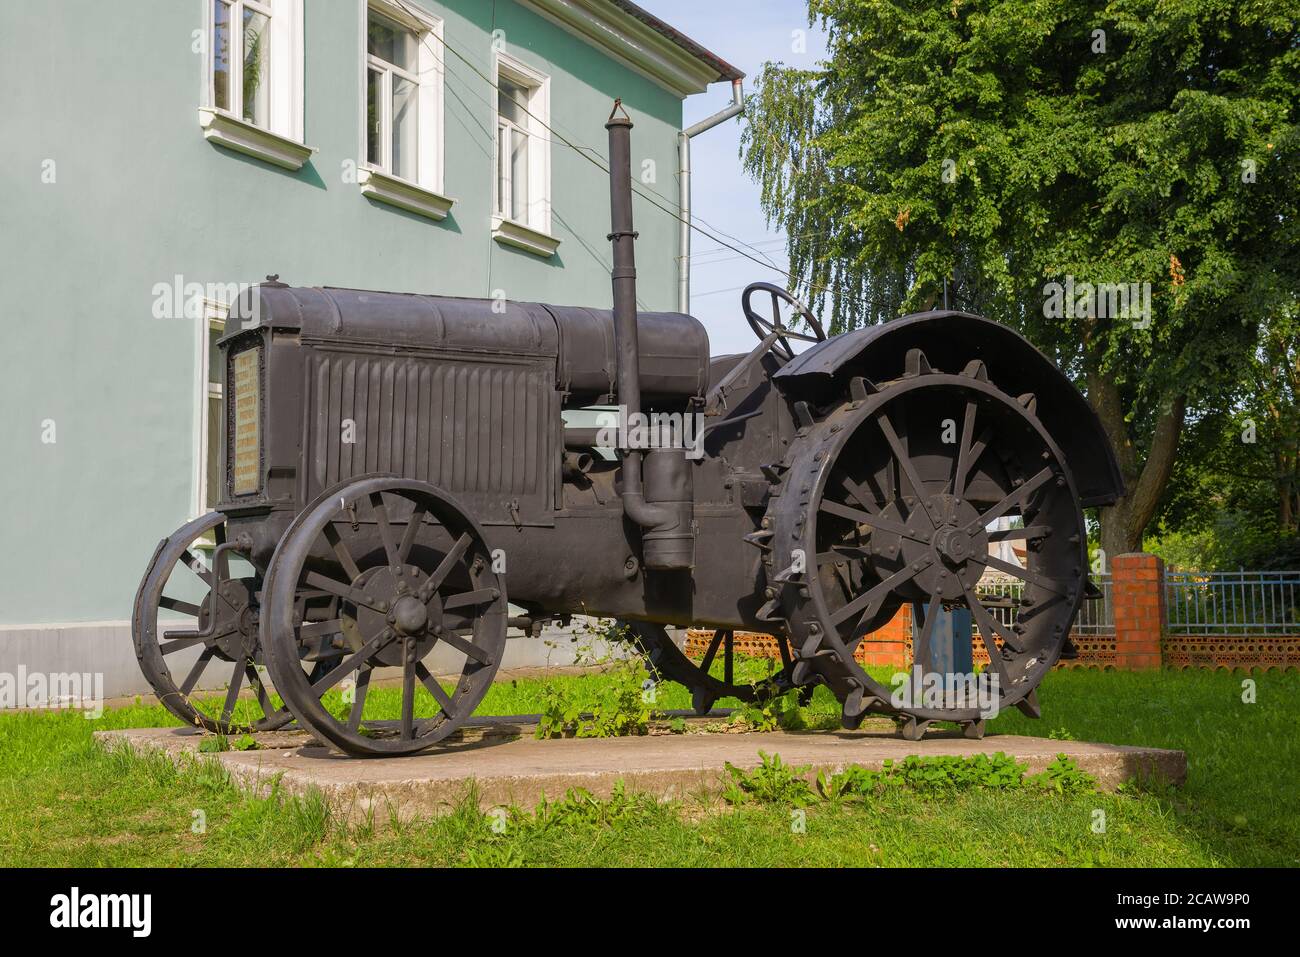 GDOV, RUSSIA - JULY 19, 2020: Old Soviet tractor SHTZ 15/30 close up. Monument at the building of the city museum Stock Photo